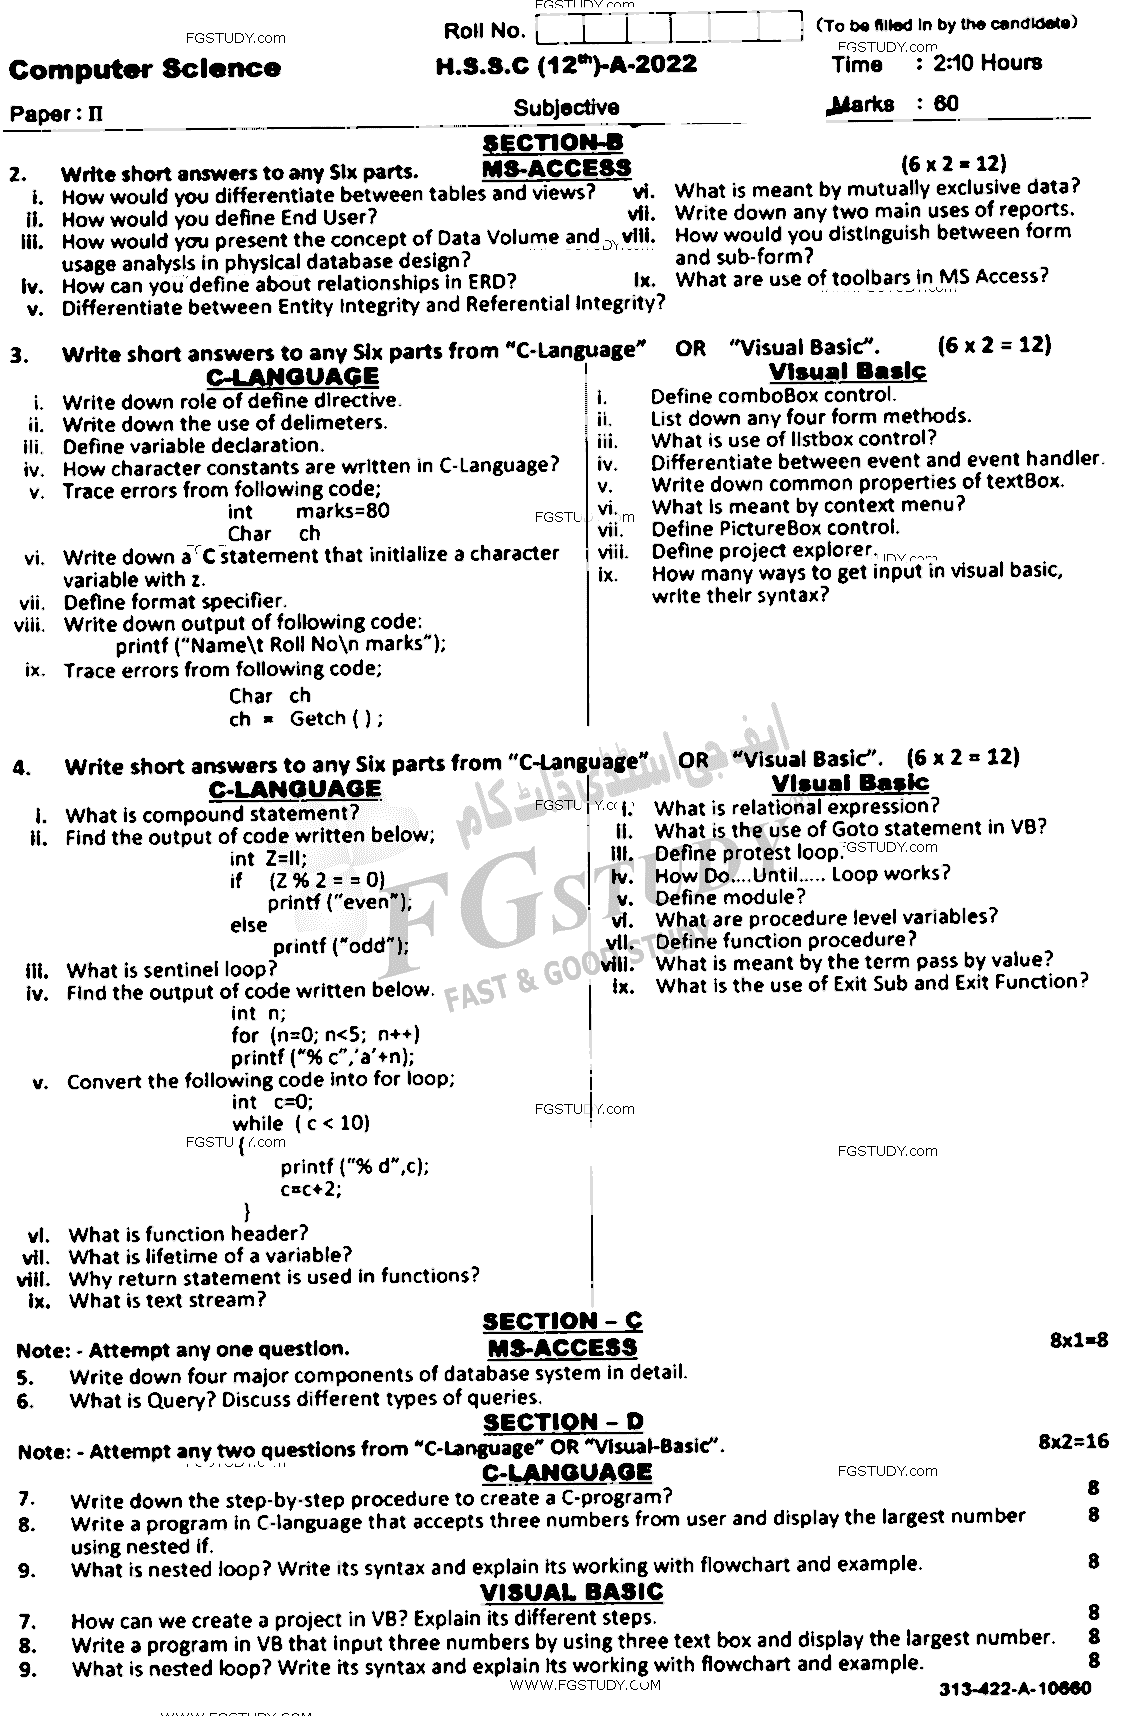 12th Class Computer Science Past Paper 2022 Sahiwal Board Subjective